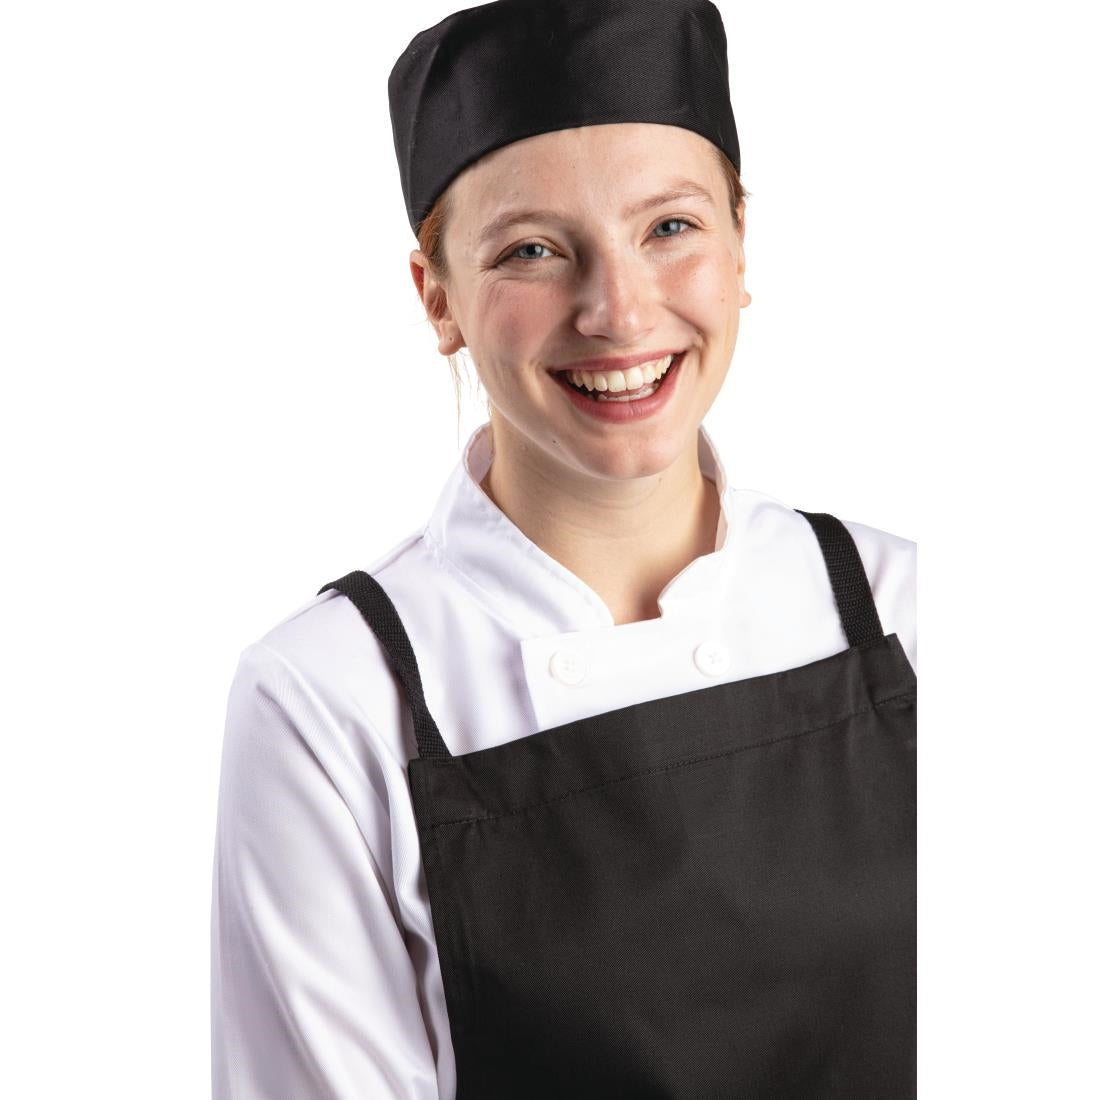 A206-M Whites Chef Skull Cap Polycotton Black - M JD Catering Equipment Solutions Ltd